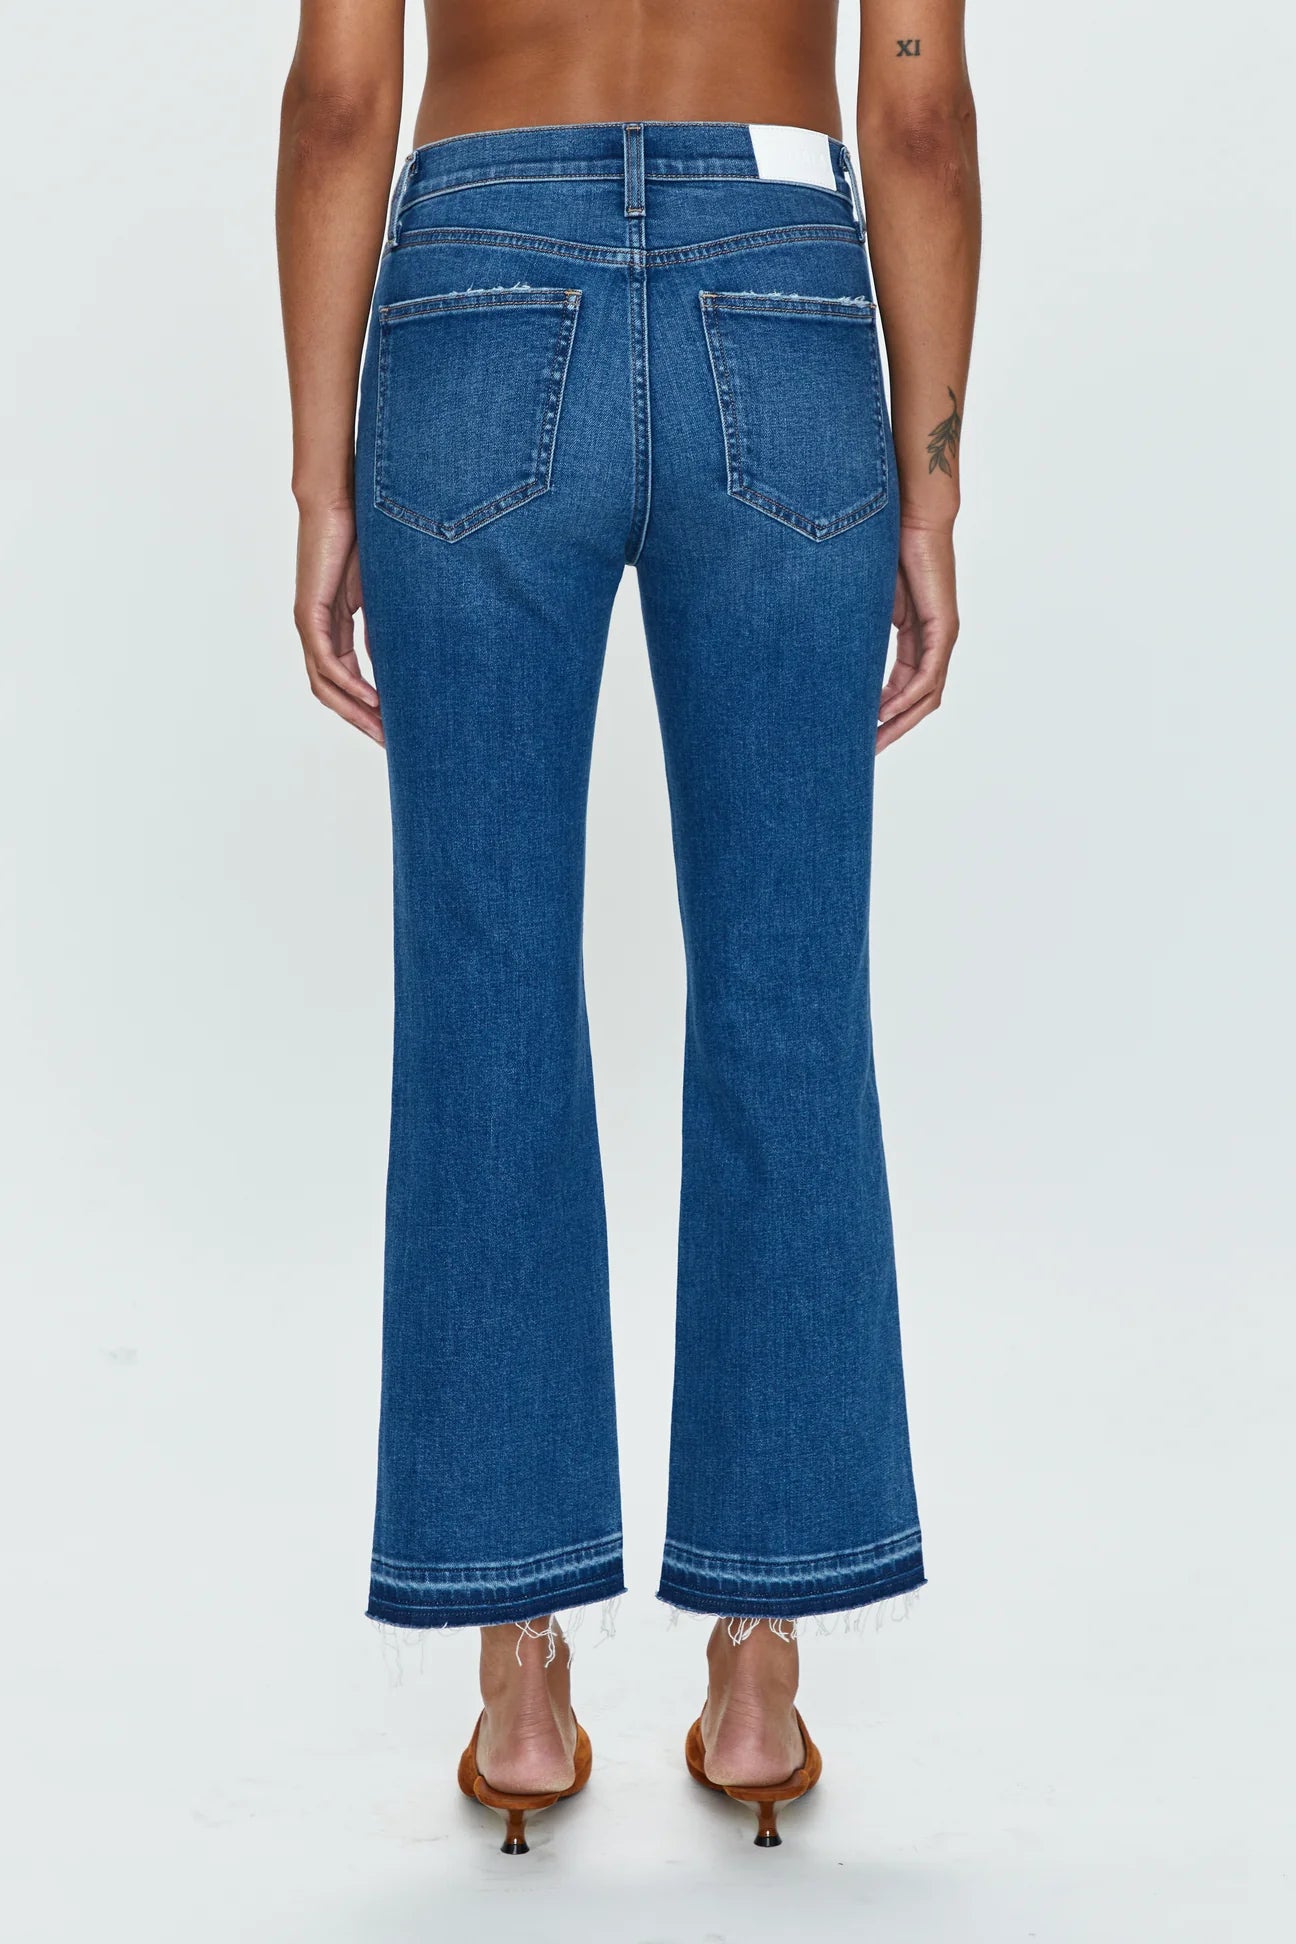 Vintage Countryside Lennon Jeans